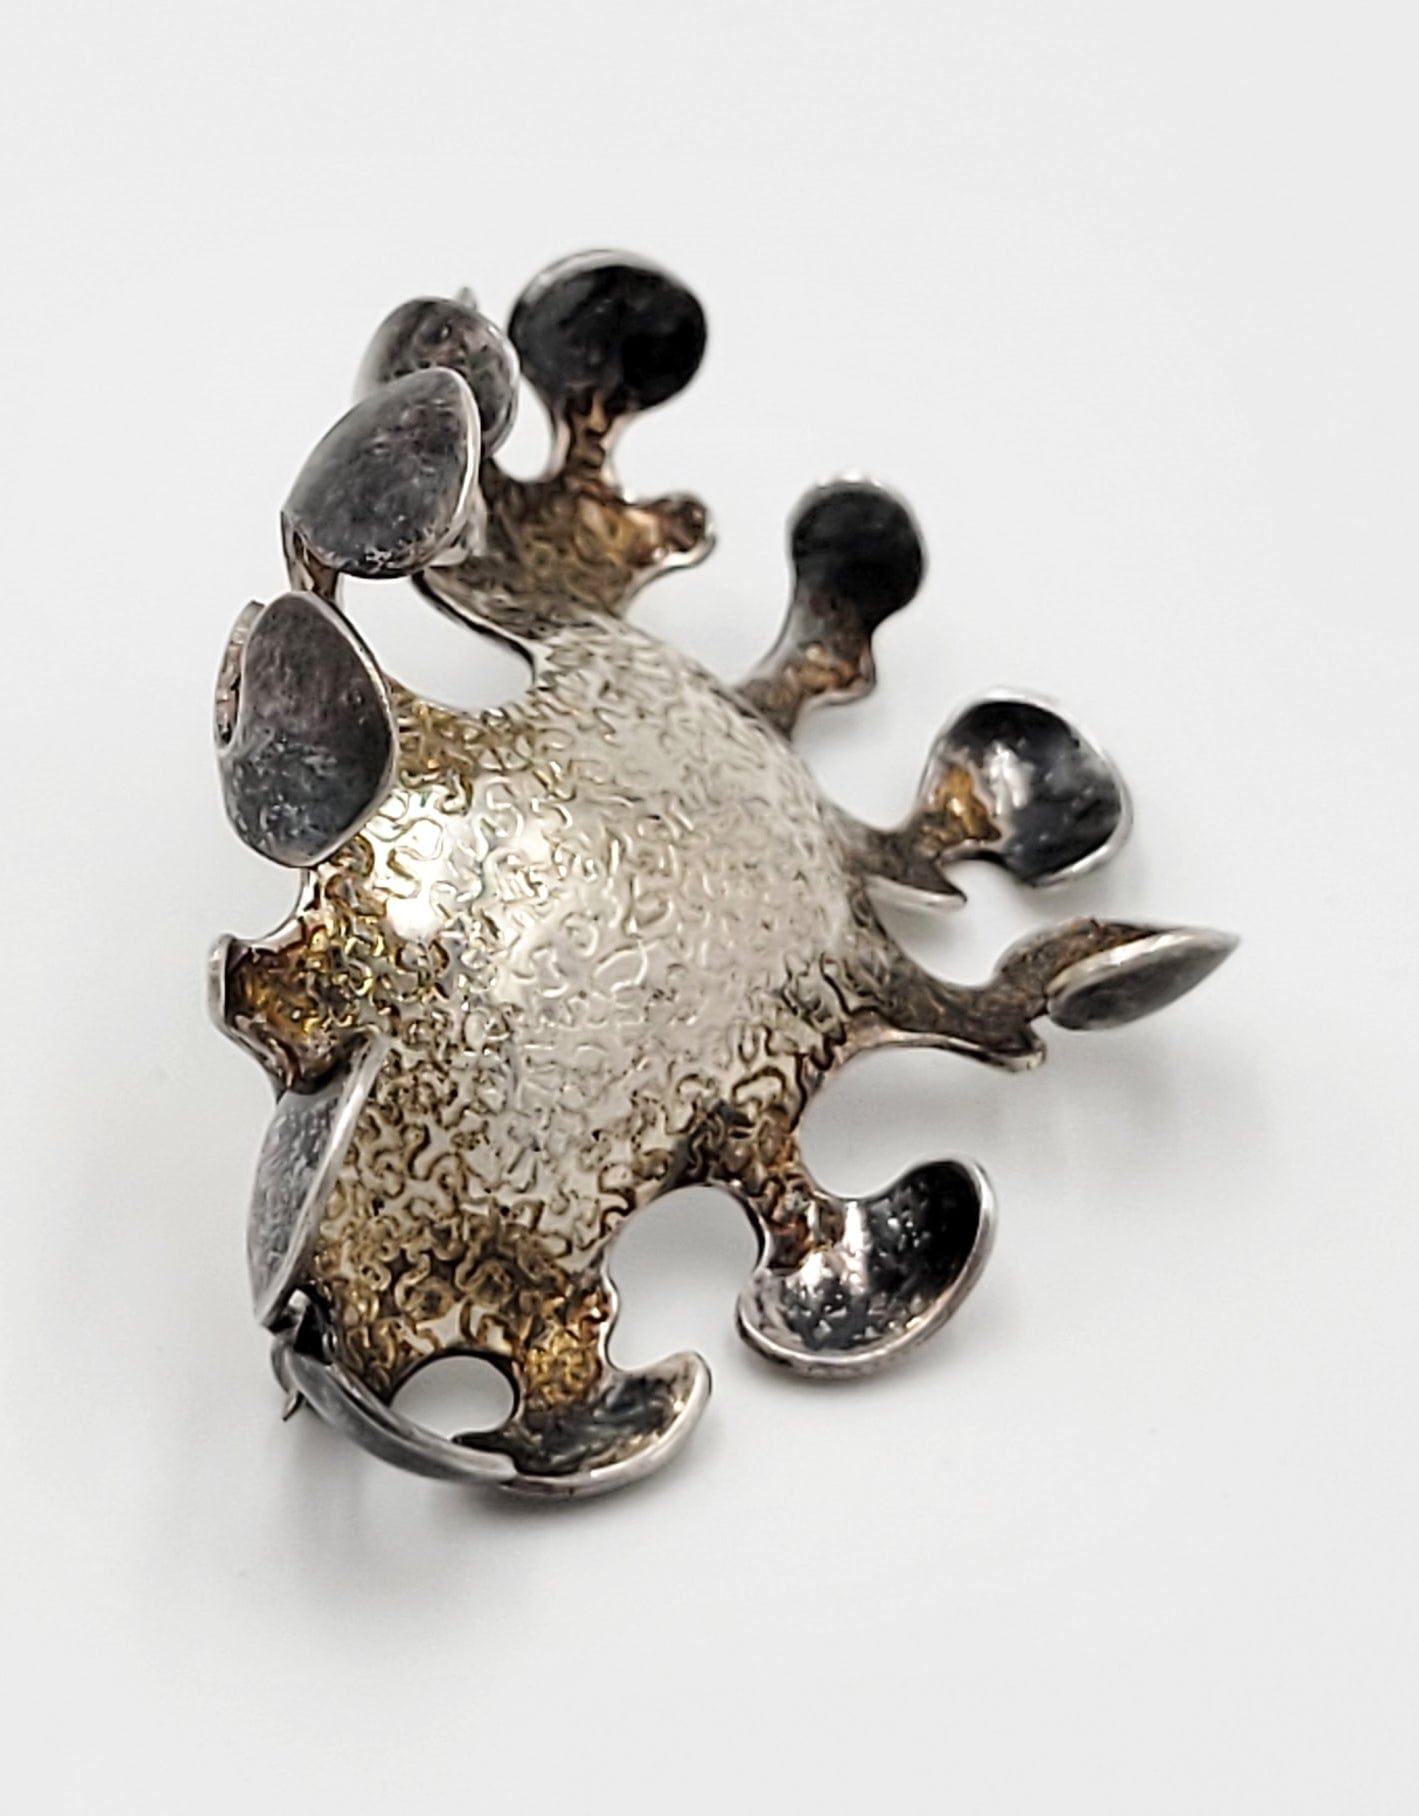 ML Sterling Jewelry Vintage Designer Sterling Biomorphic Abstract Retro Brooch Signed Dated 1972